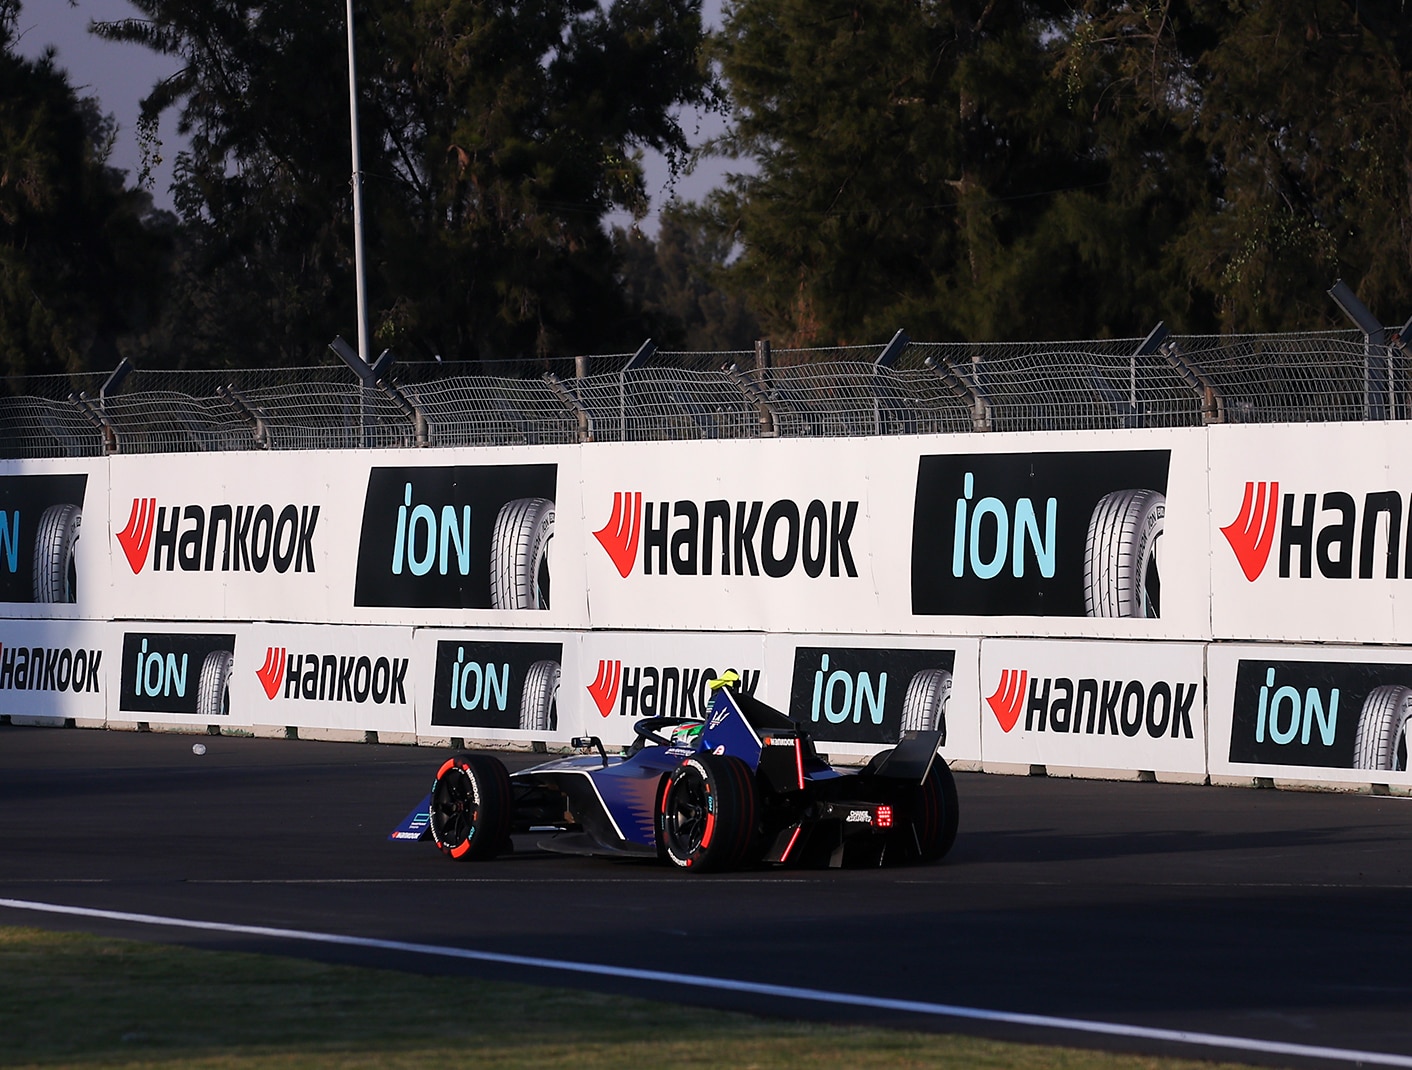 Double-header, night race and desert sand: The Hankook iON Race is ready for the Diriyah E-Prix